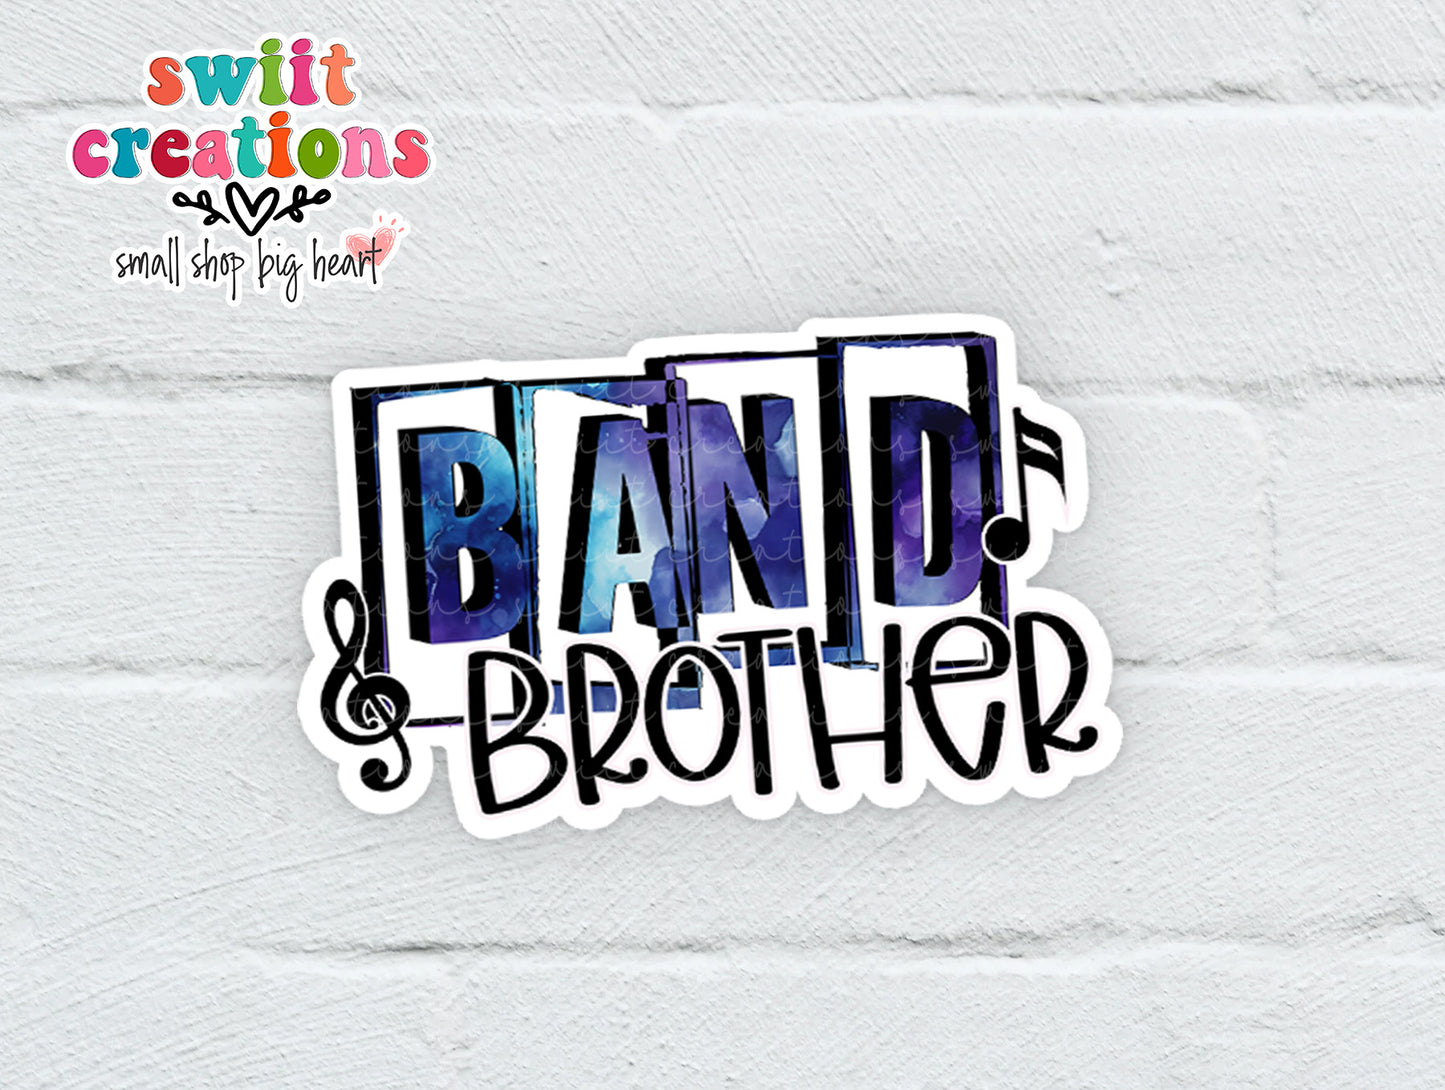 Band Brother Sticker (SS774) | SCD774